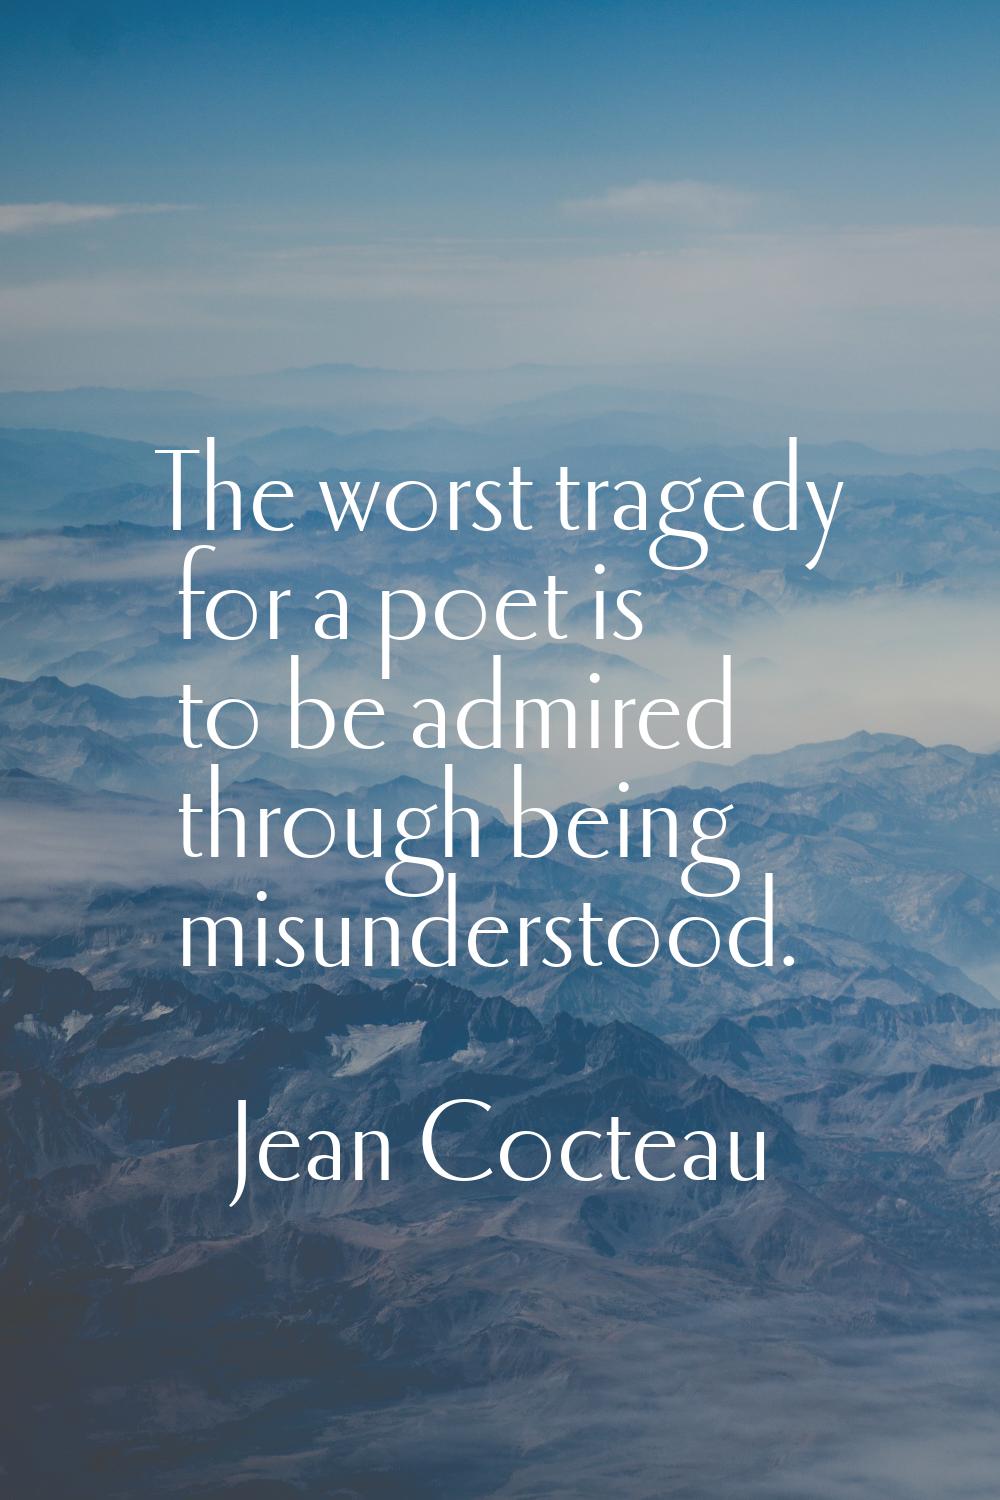 The worst tragedy for a poet is to be admired through being misunderstood.